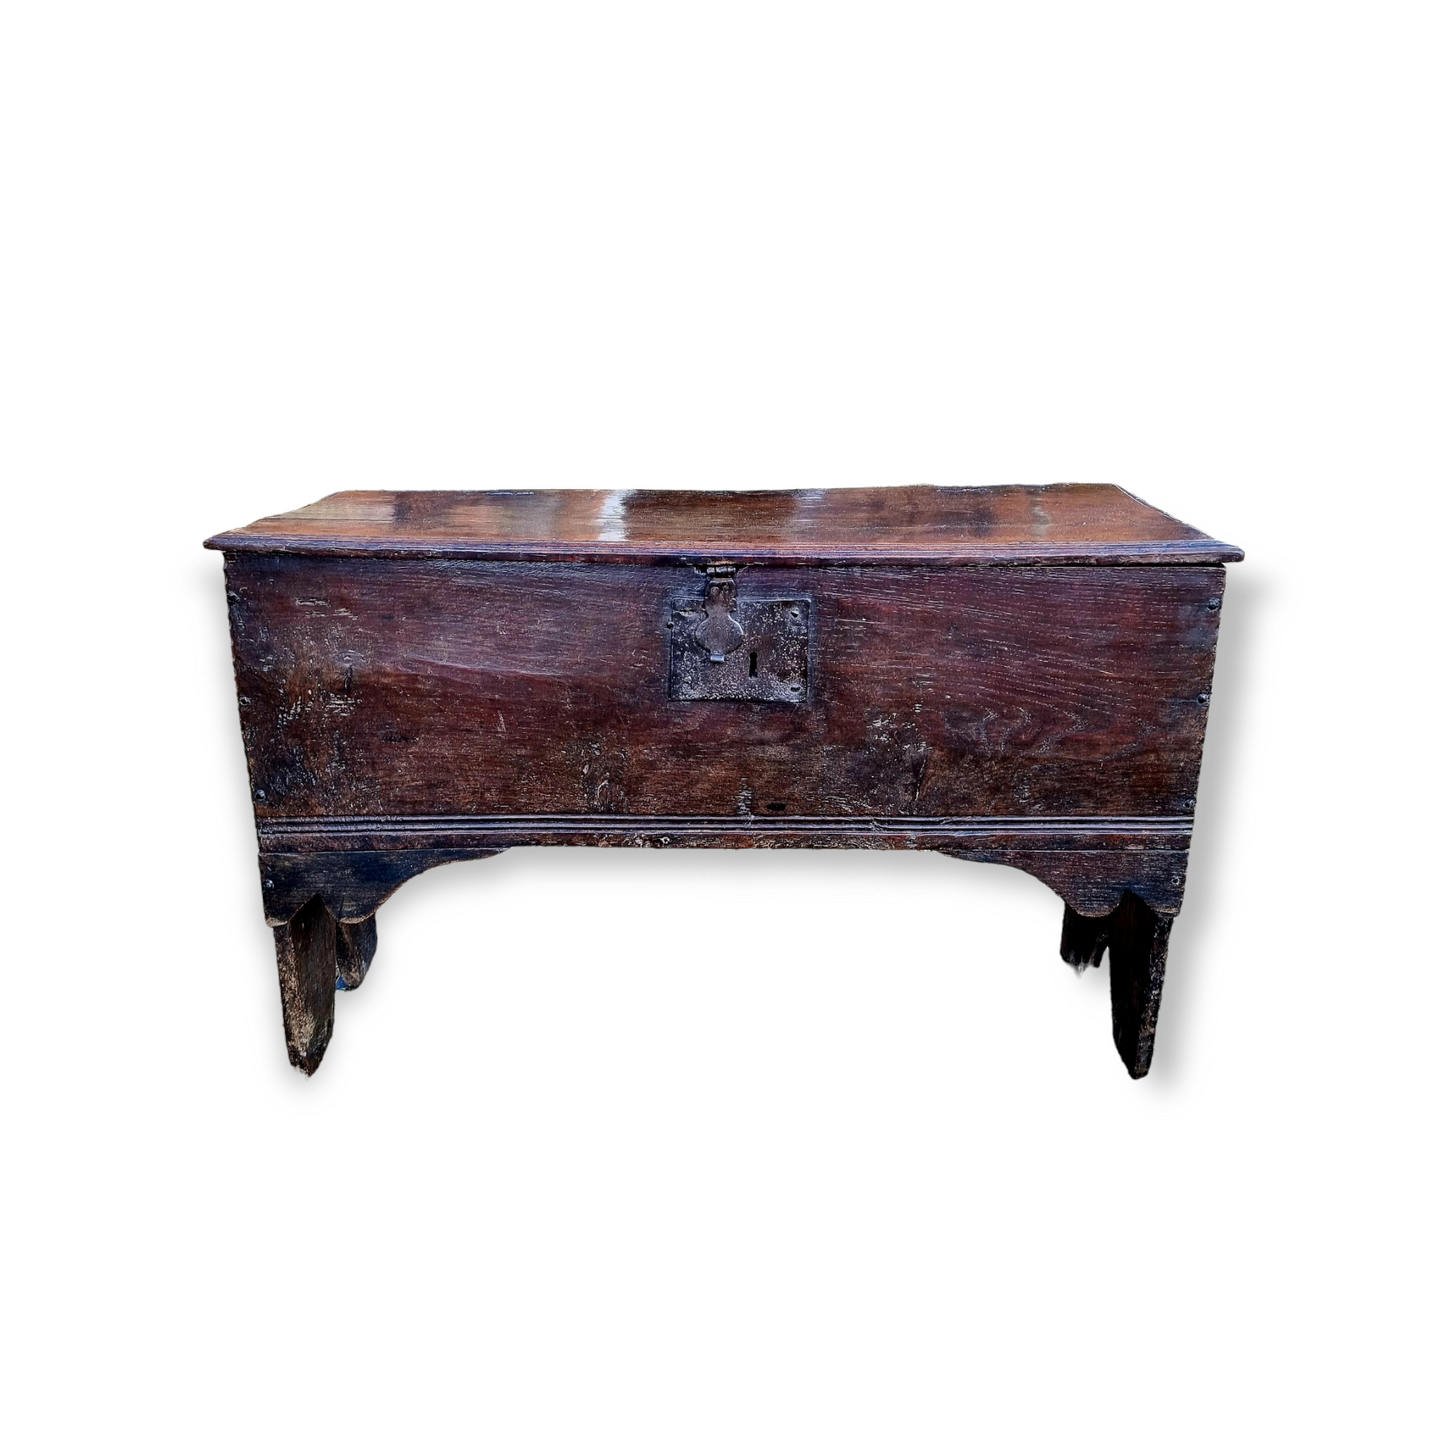 An Early 17th Century English Antique Oak Six-Plank Chest or Coffer